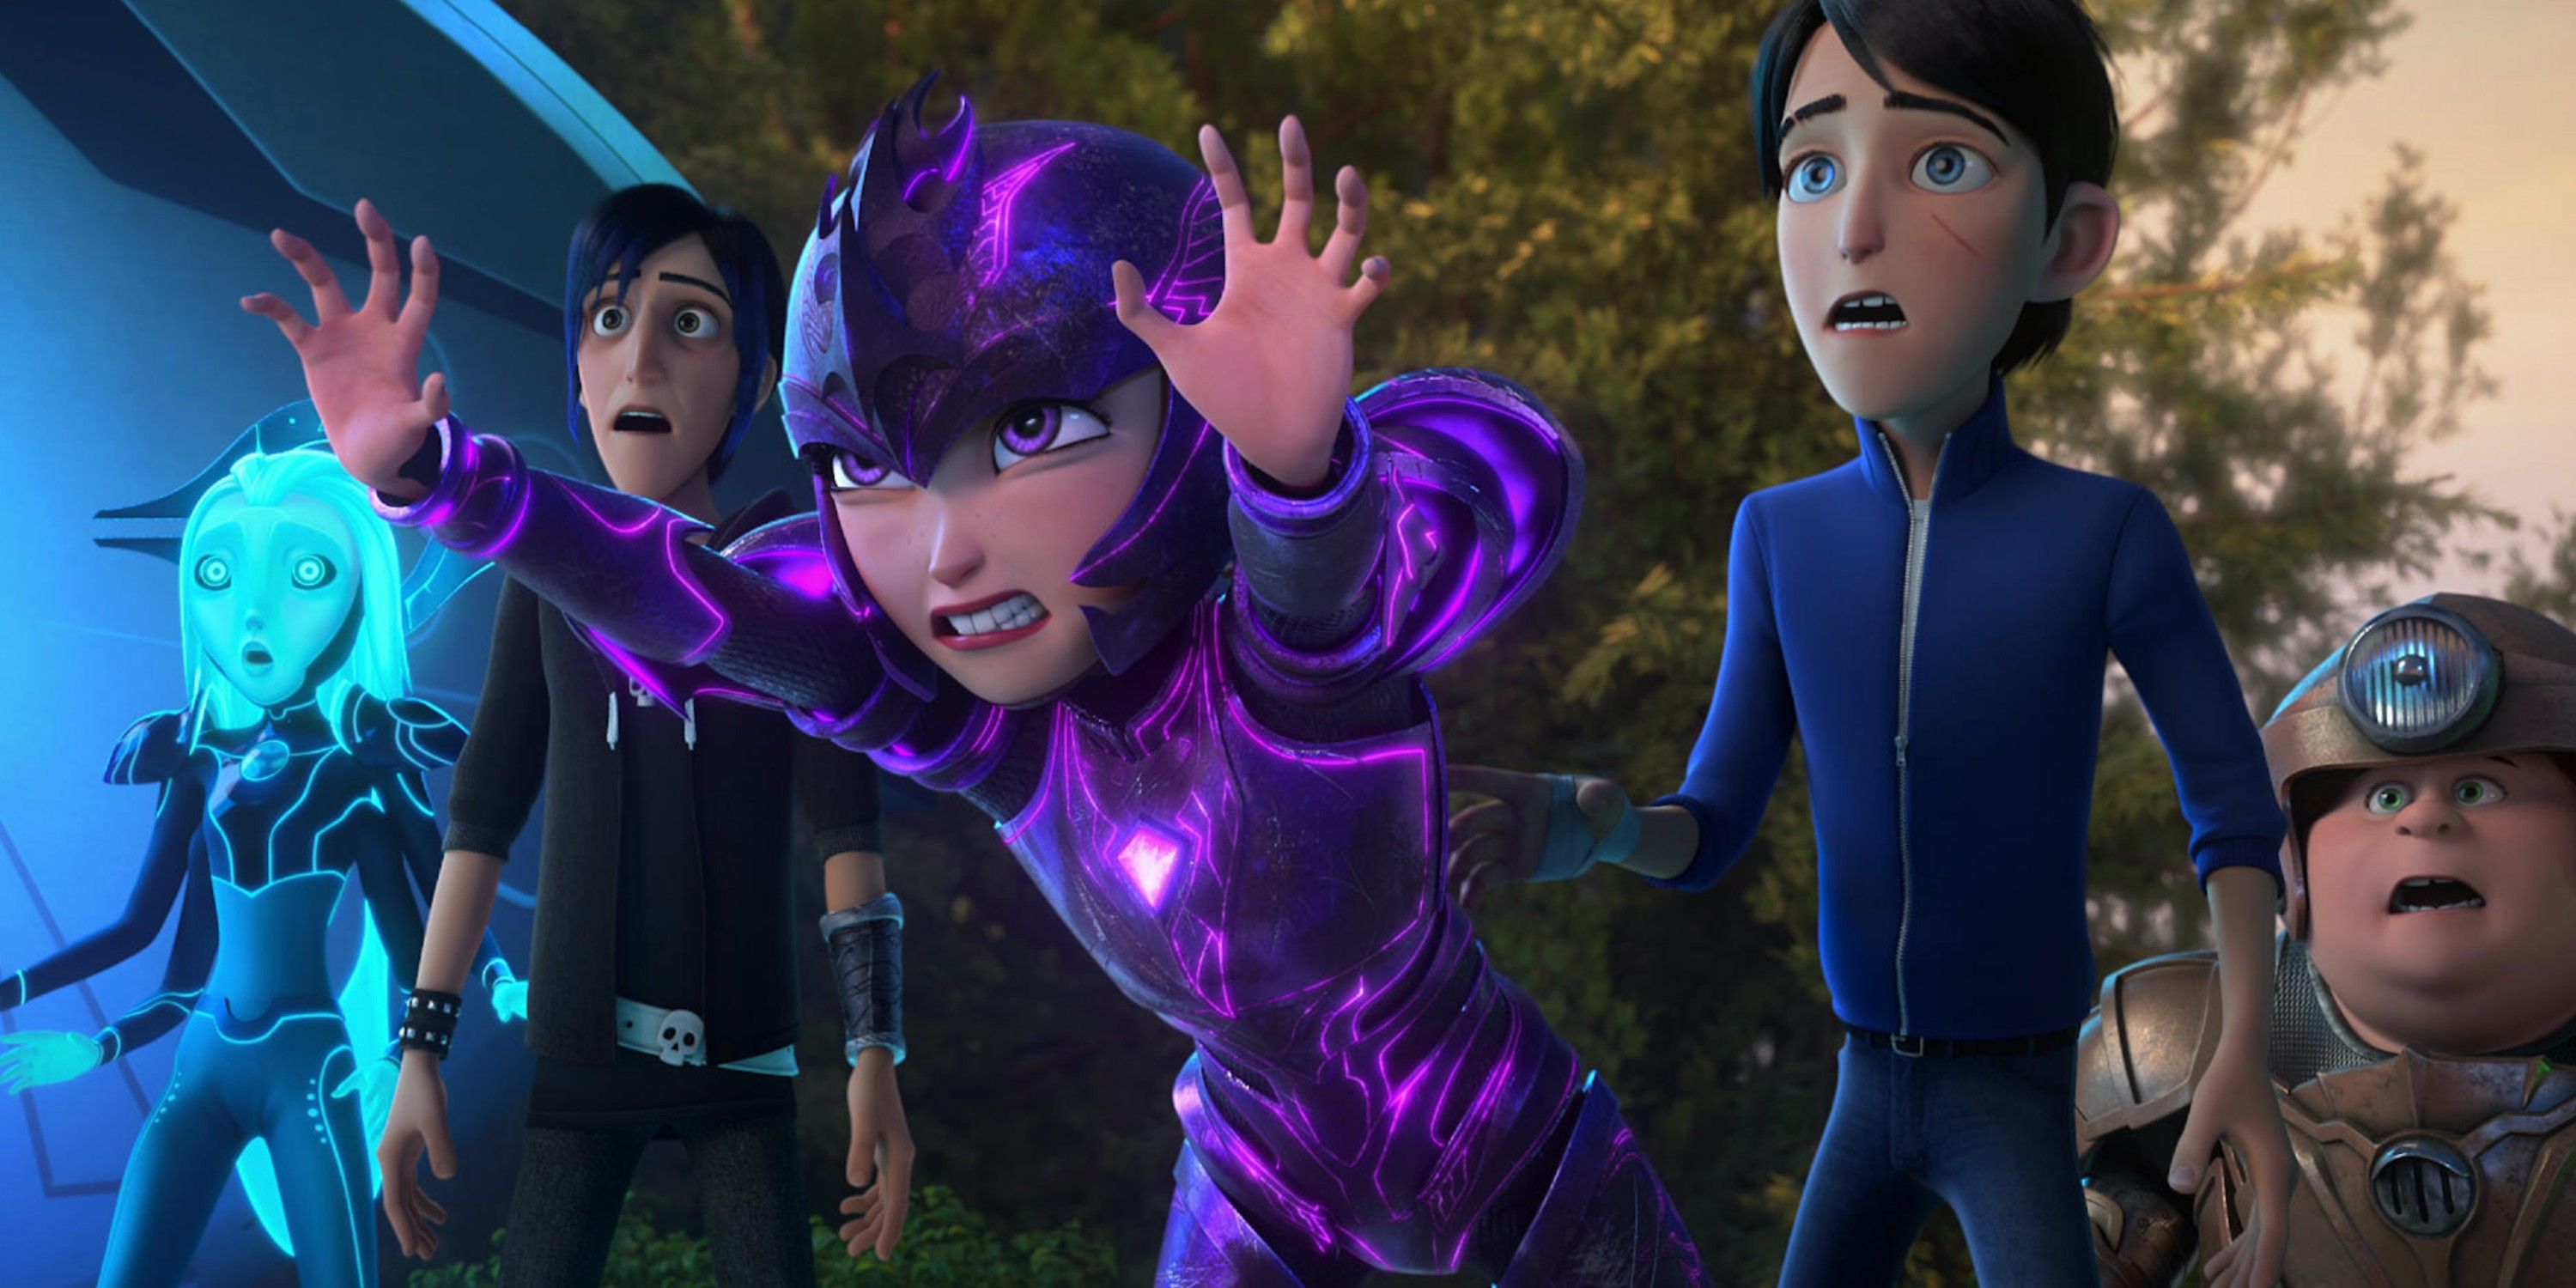 Trollhunters: Rise of the Titans on Netflix